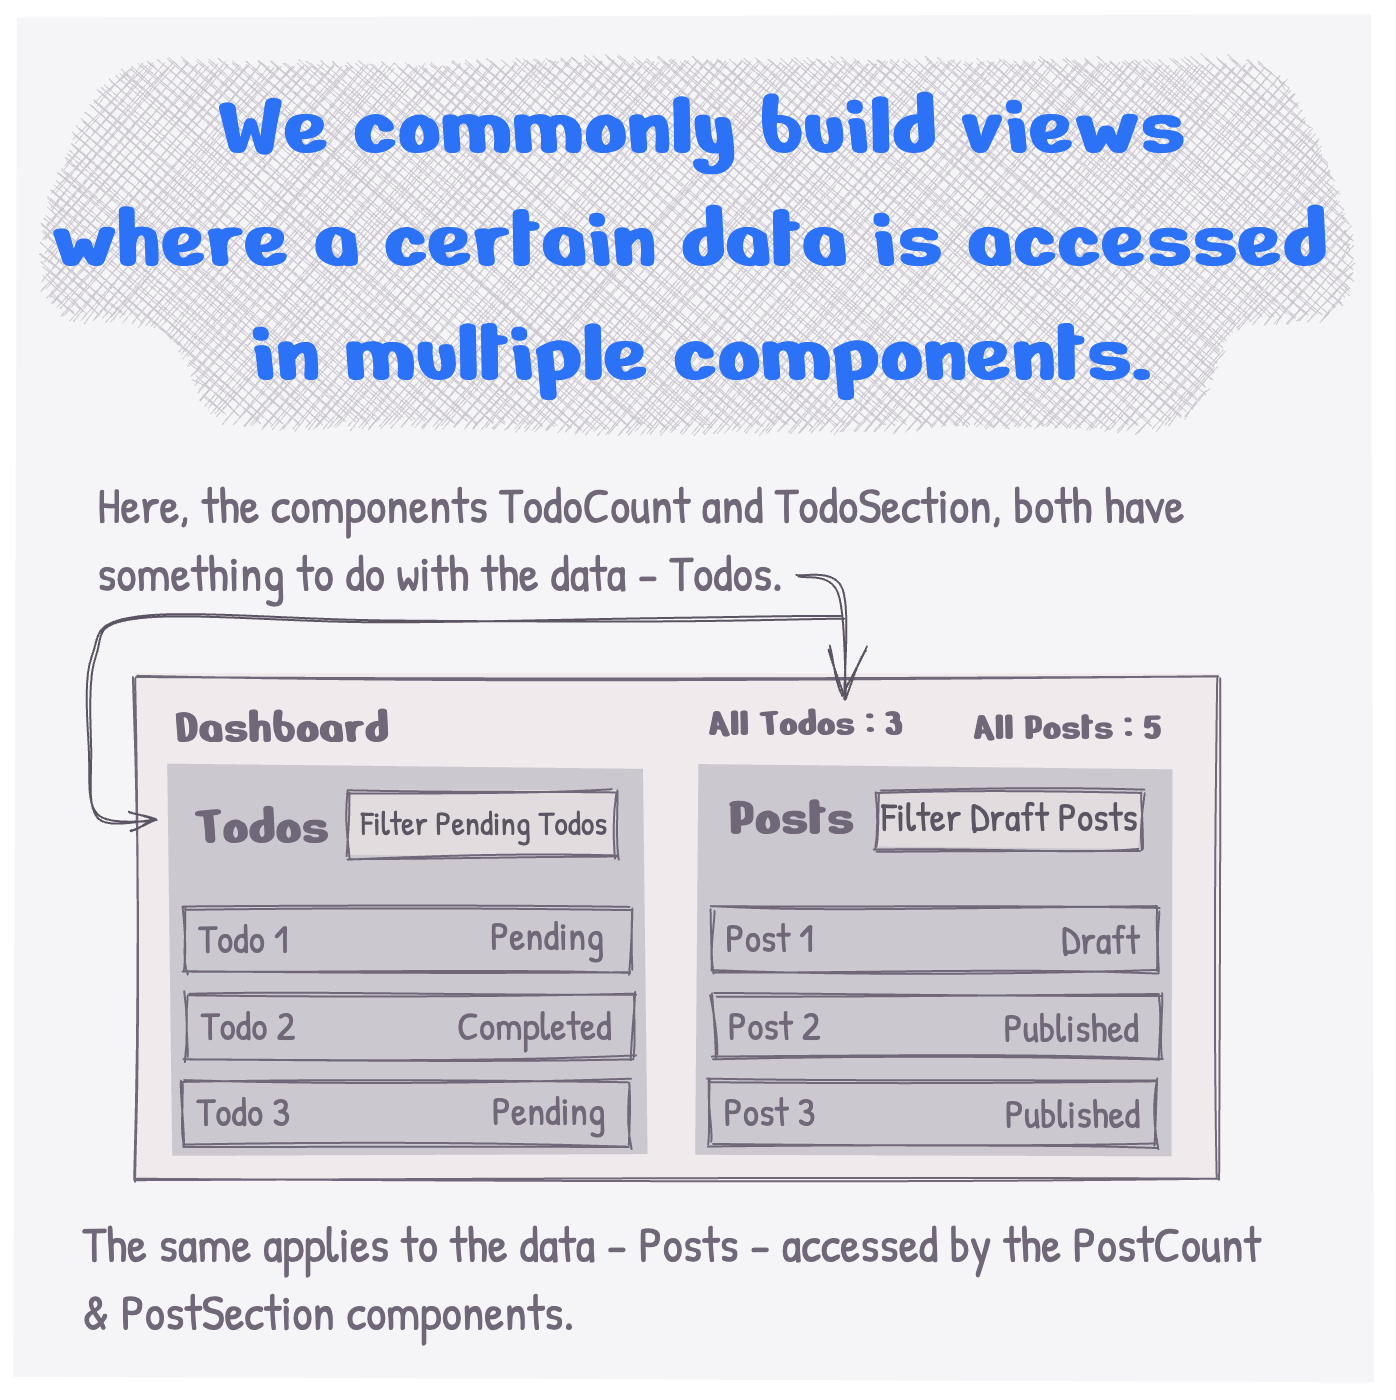 We commonly build views where a certain data is accessed in multiple components.